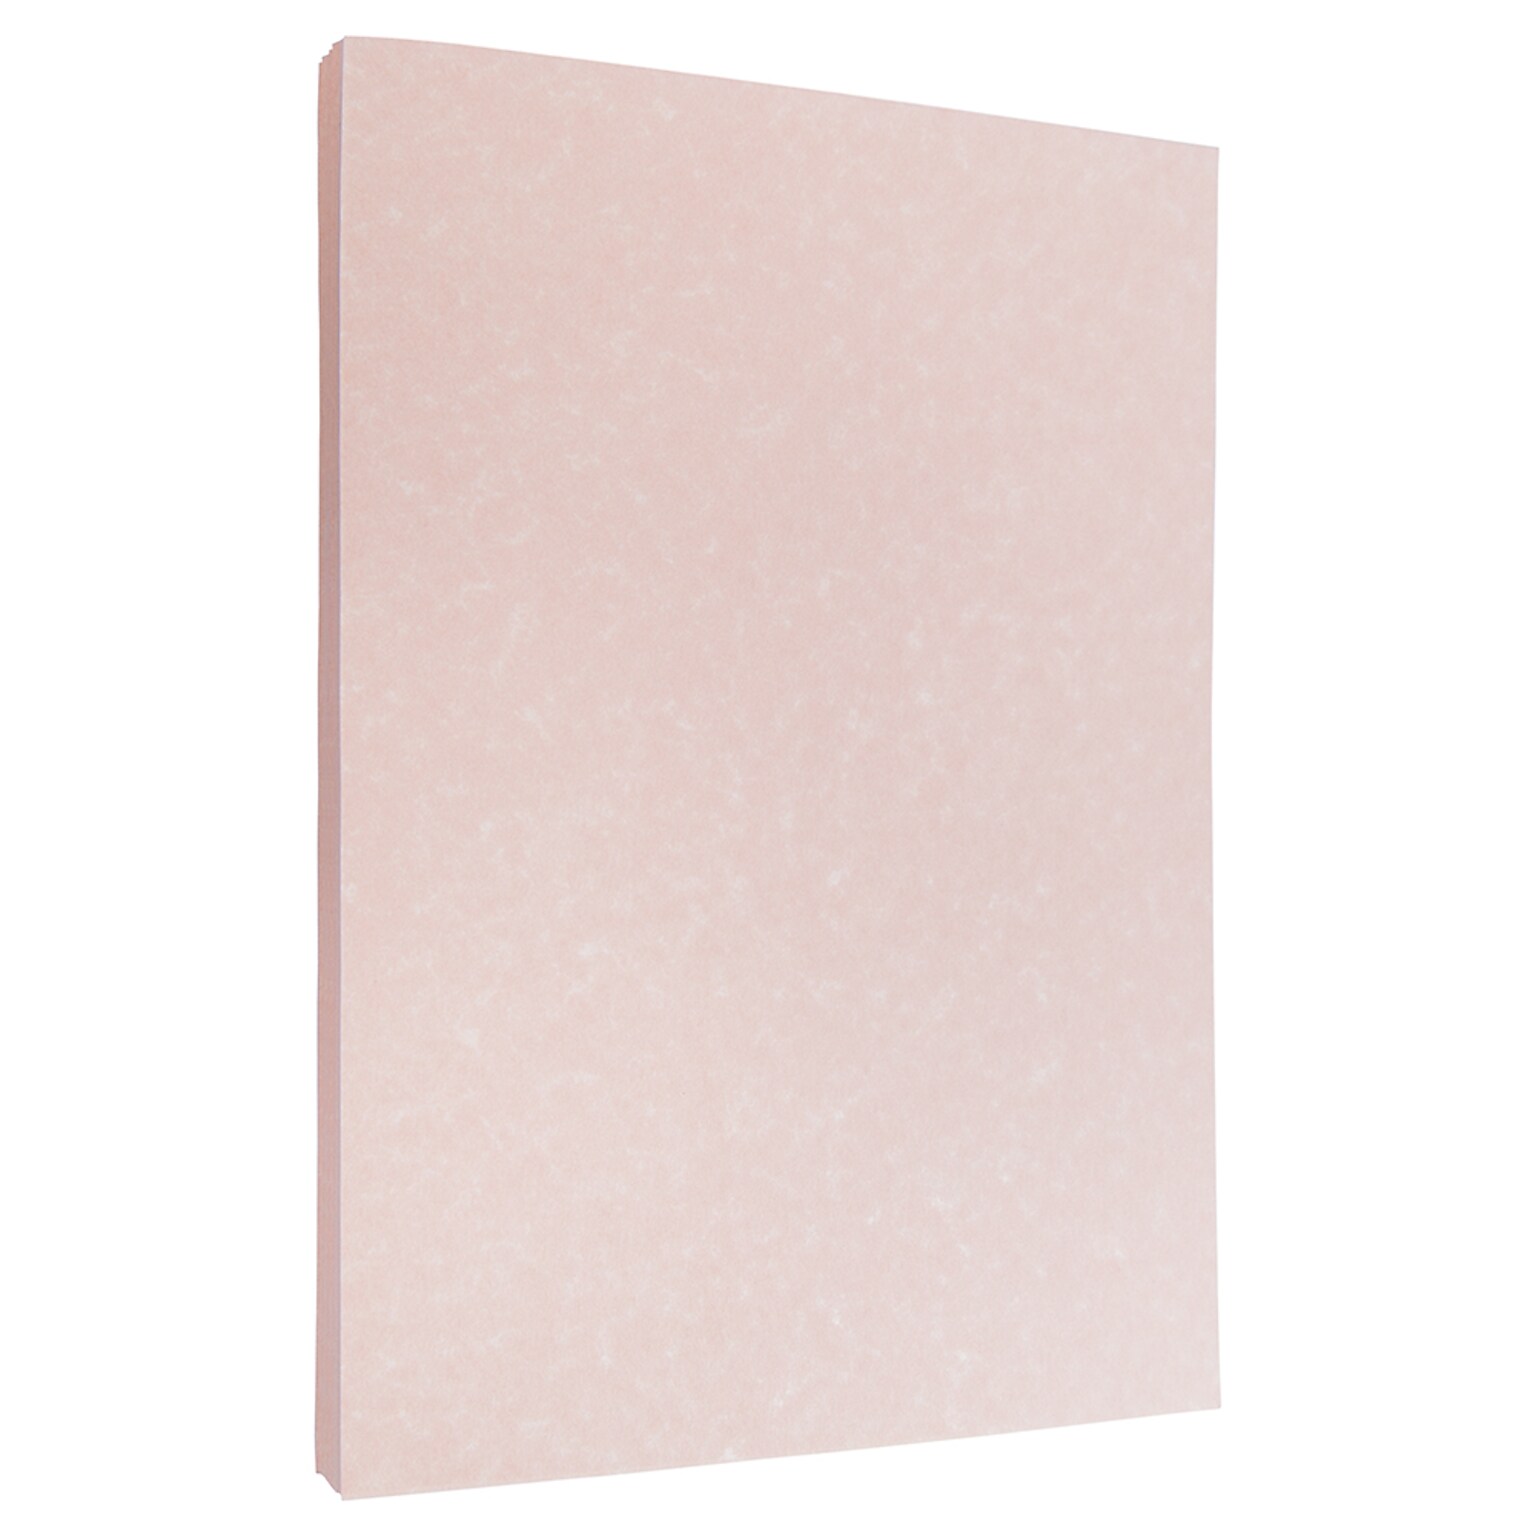 JAM Paper 30% Recycled Parchment Cardstock, 65 lb., 8.5 x 11, Salmon Pink, 50 Sheets/Pack (17137623)